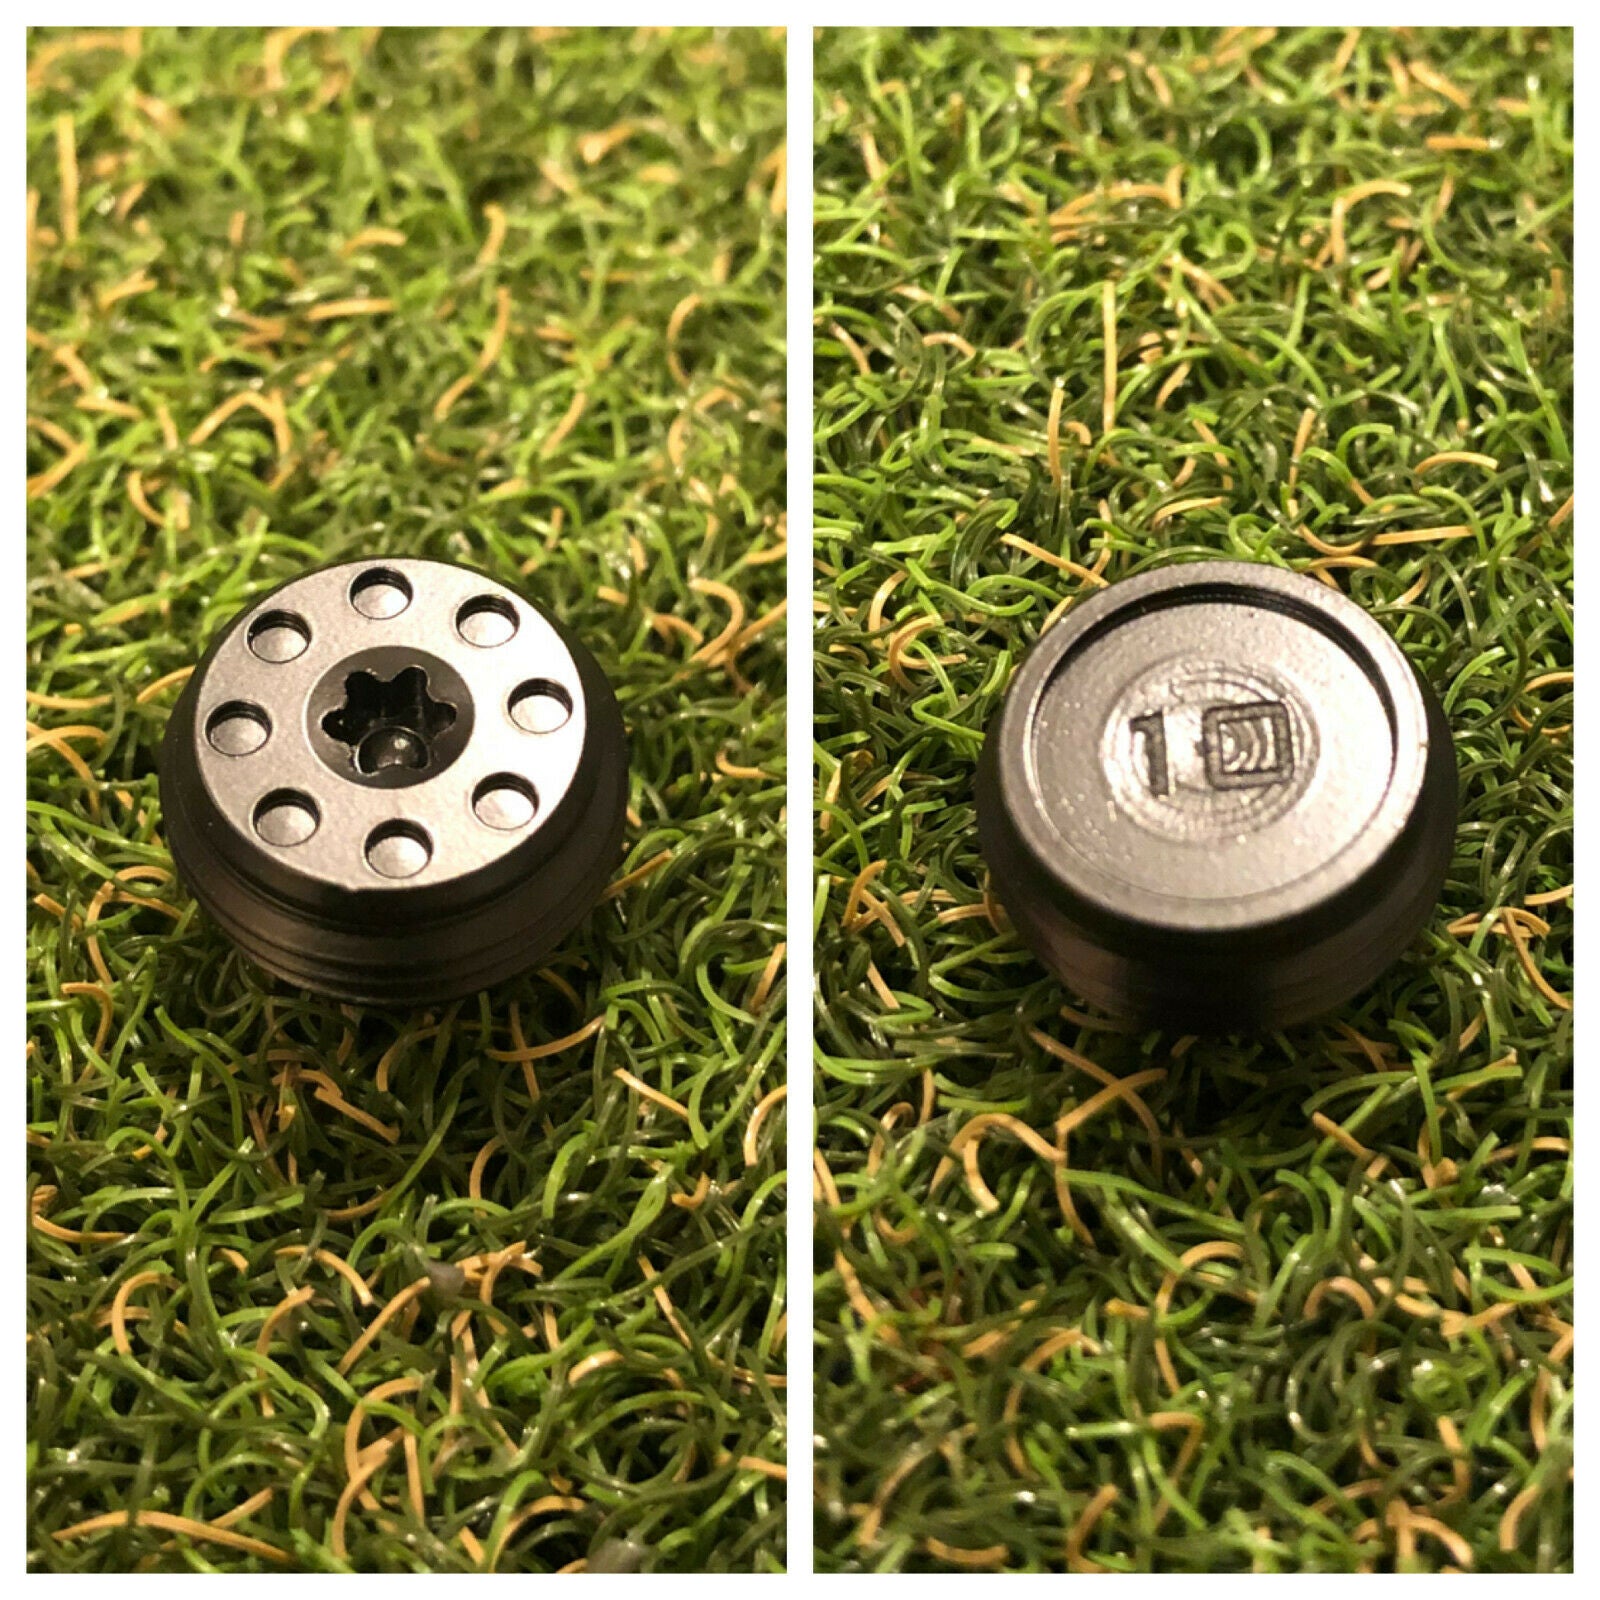 Weight Screws for PXG GEN2 Putters, 0811 X X+ Prototype Drivers 5g, 10, 20g - The Golf Club Trader